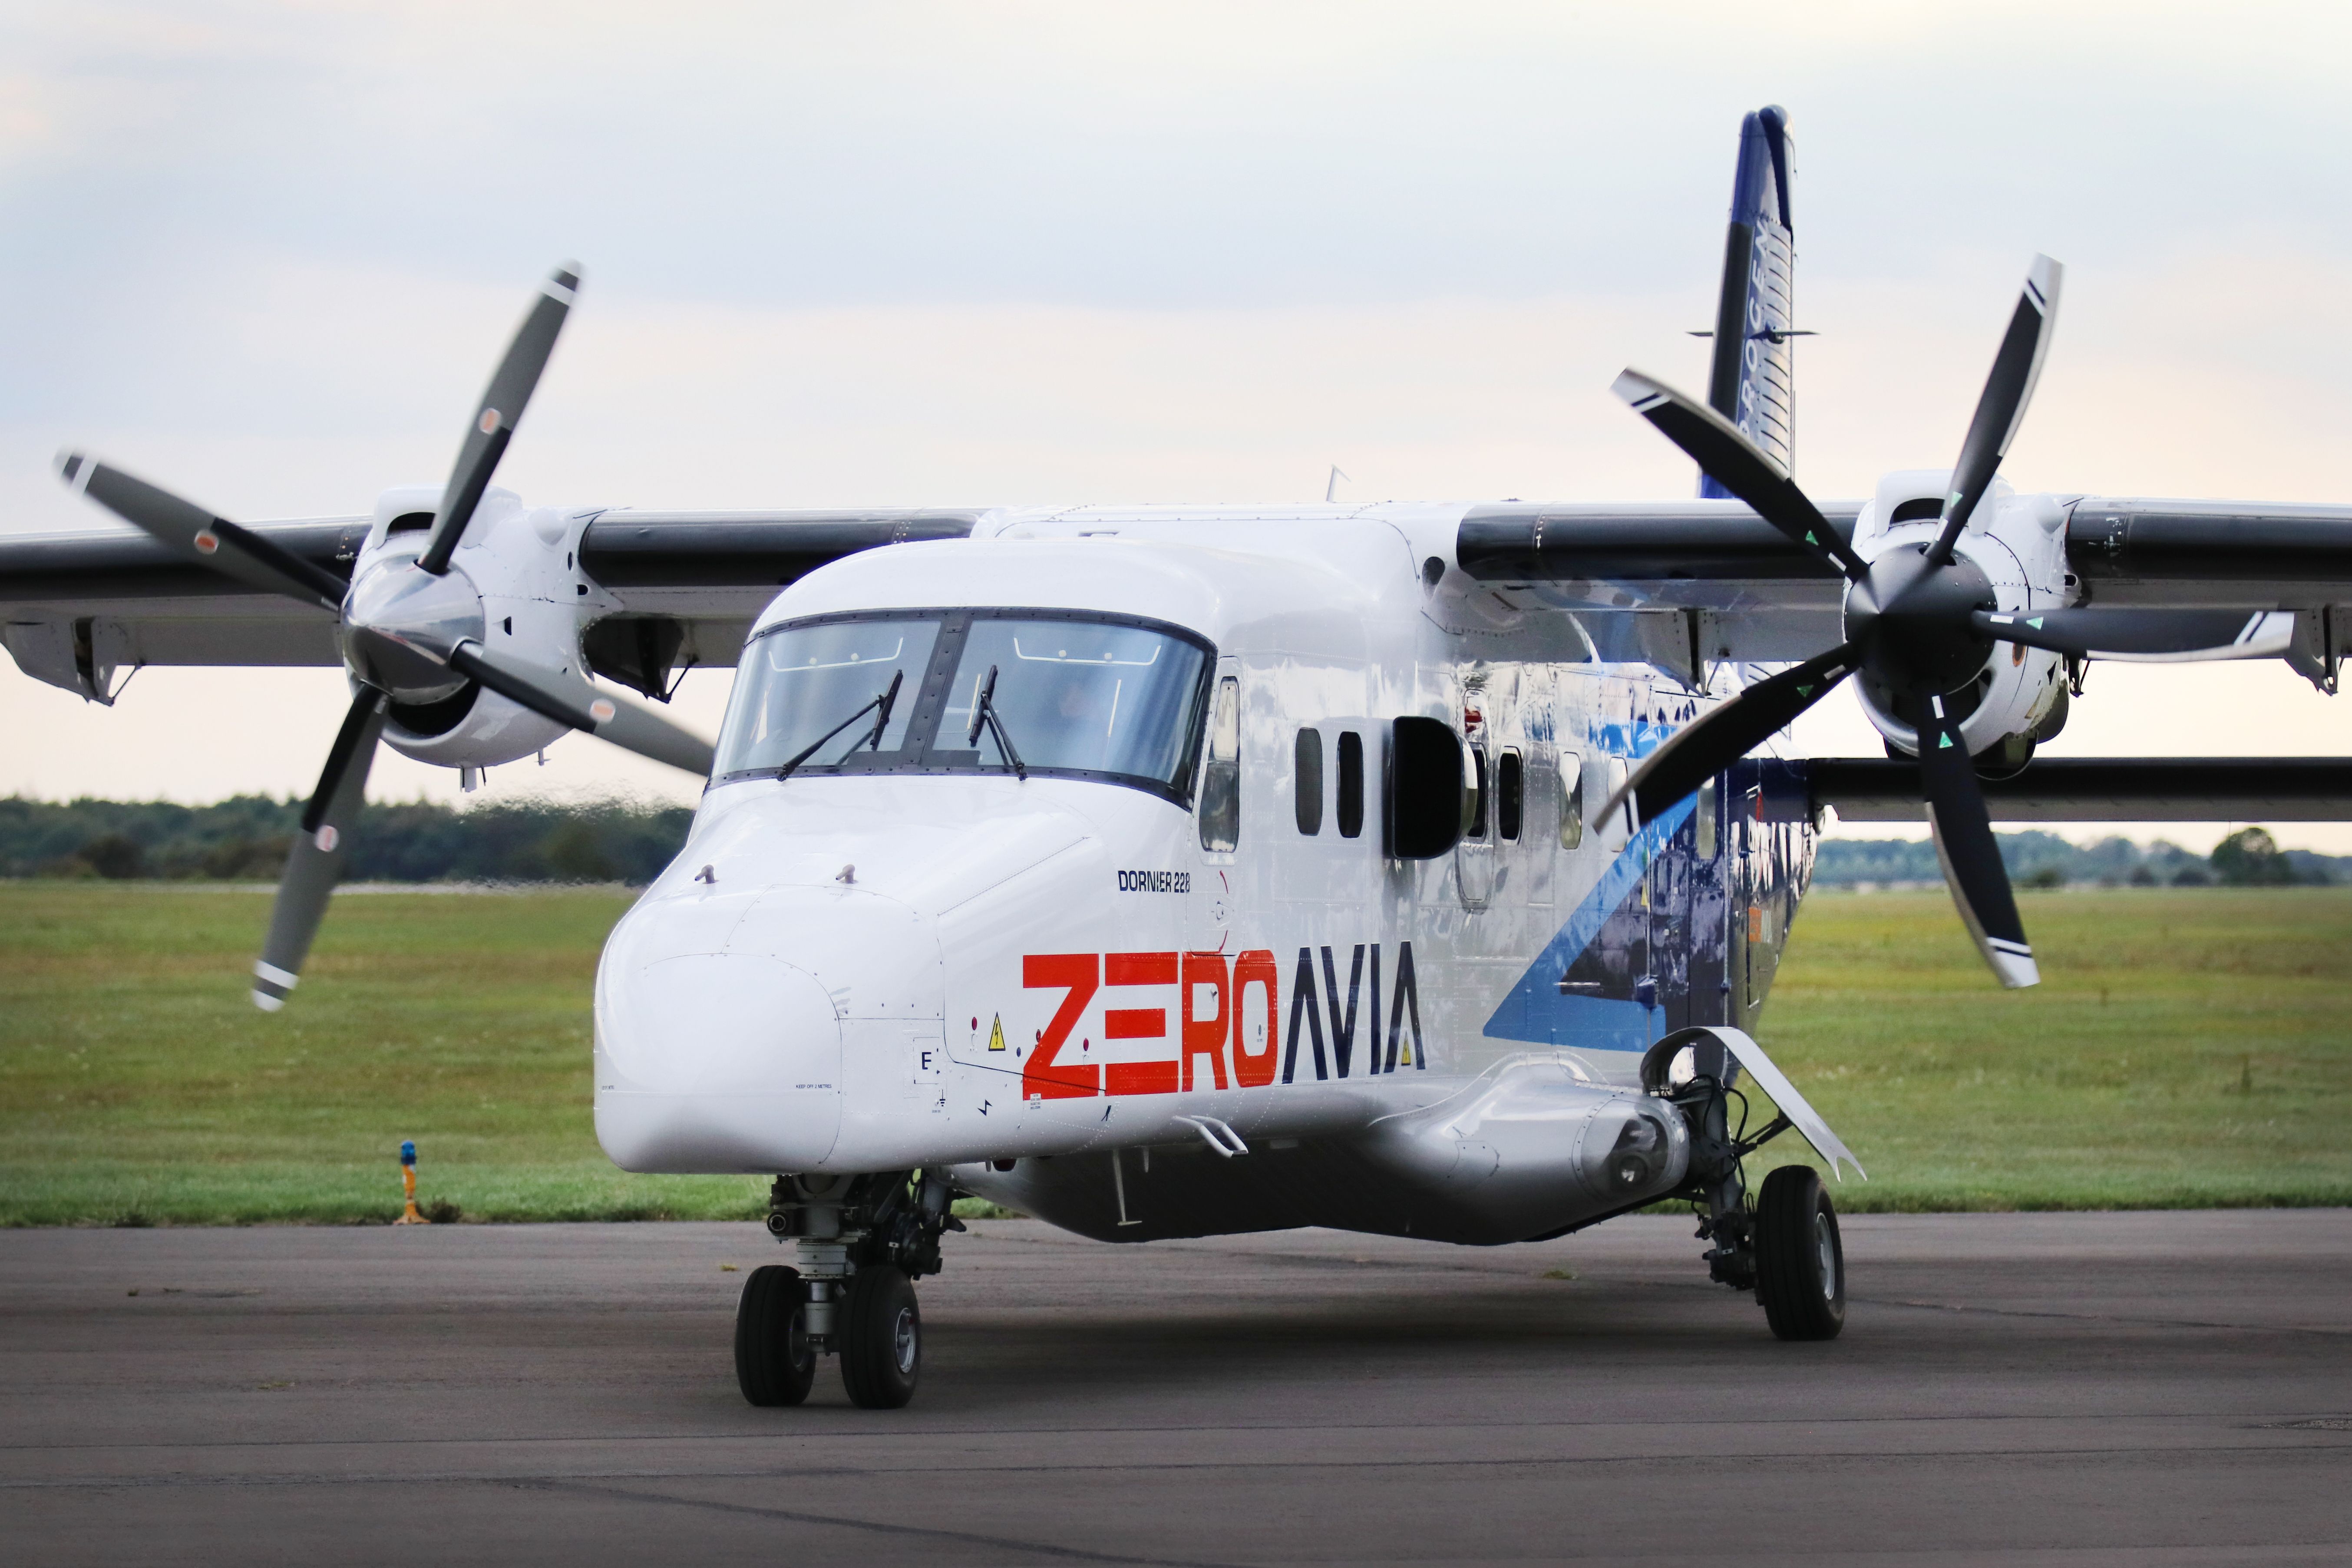 ZeroAvia demonstrator aircraft seen from the front